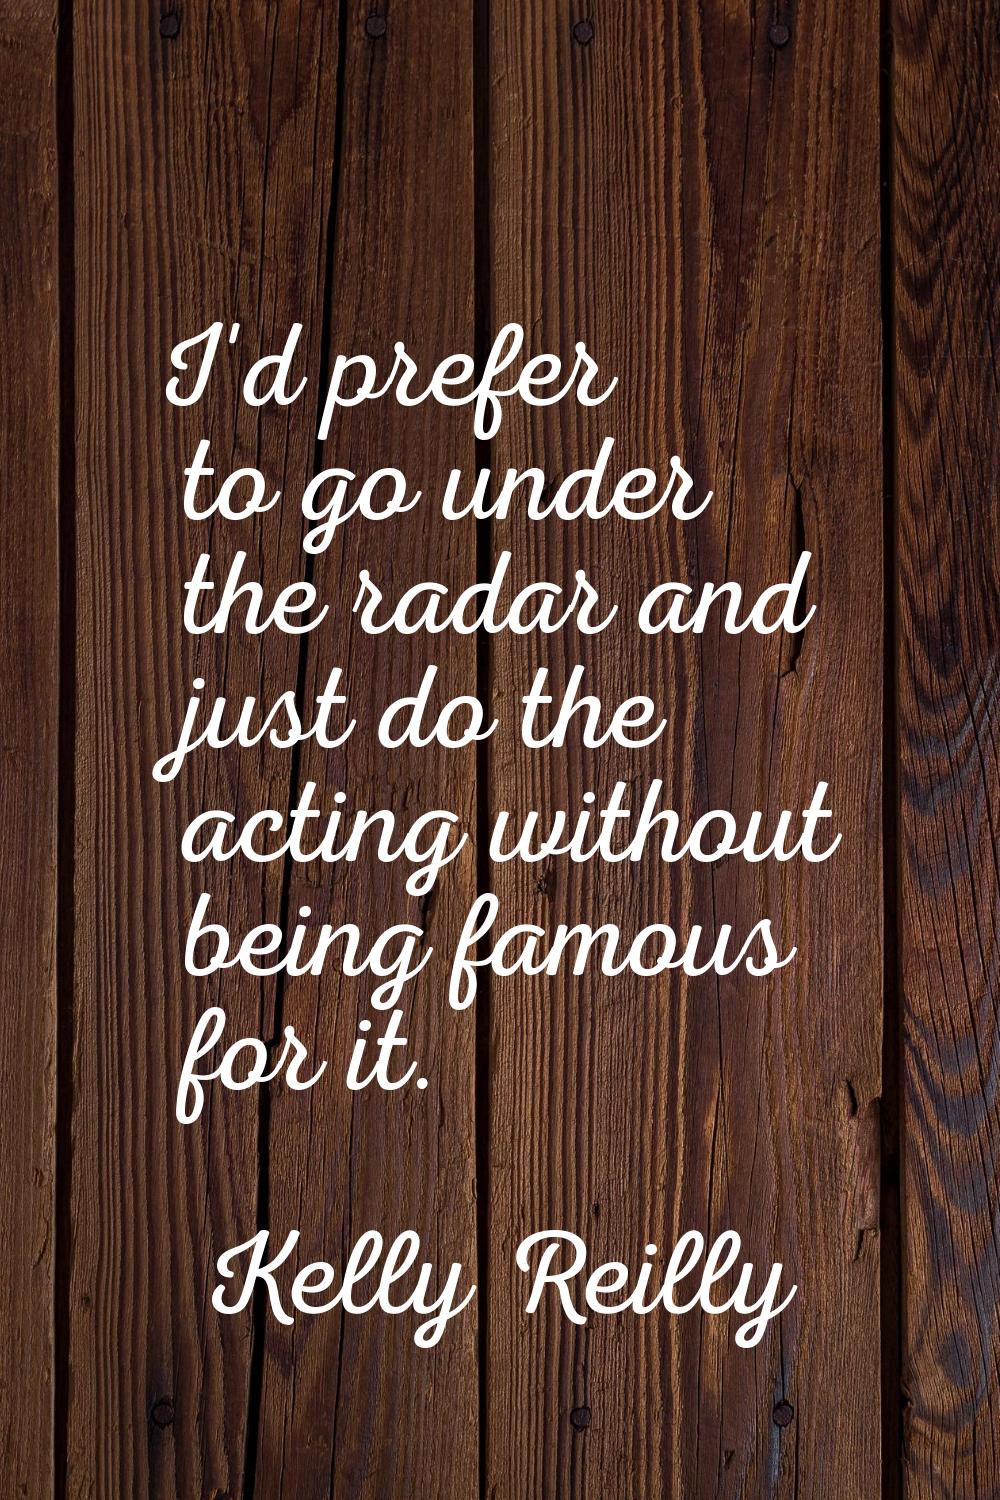 I'd prefer to go under the radar and just do the acting without being famous for it.